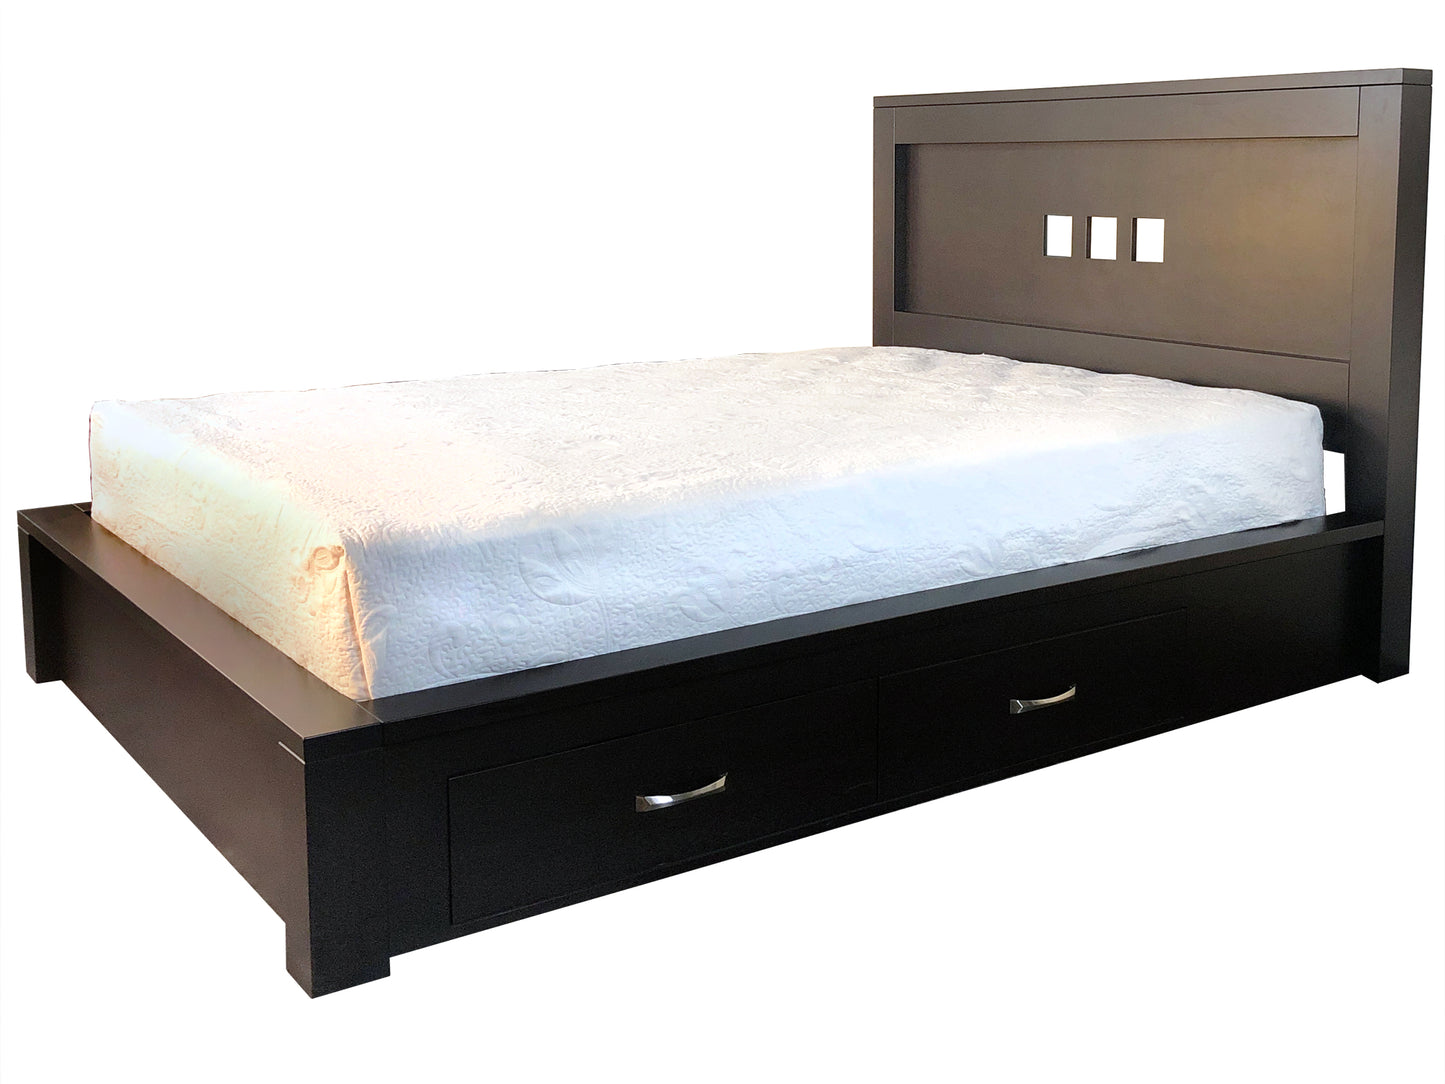 Boxwood Storage Bed with 4 large drawers made in BC this is an in-house design